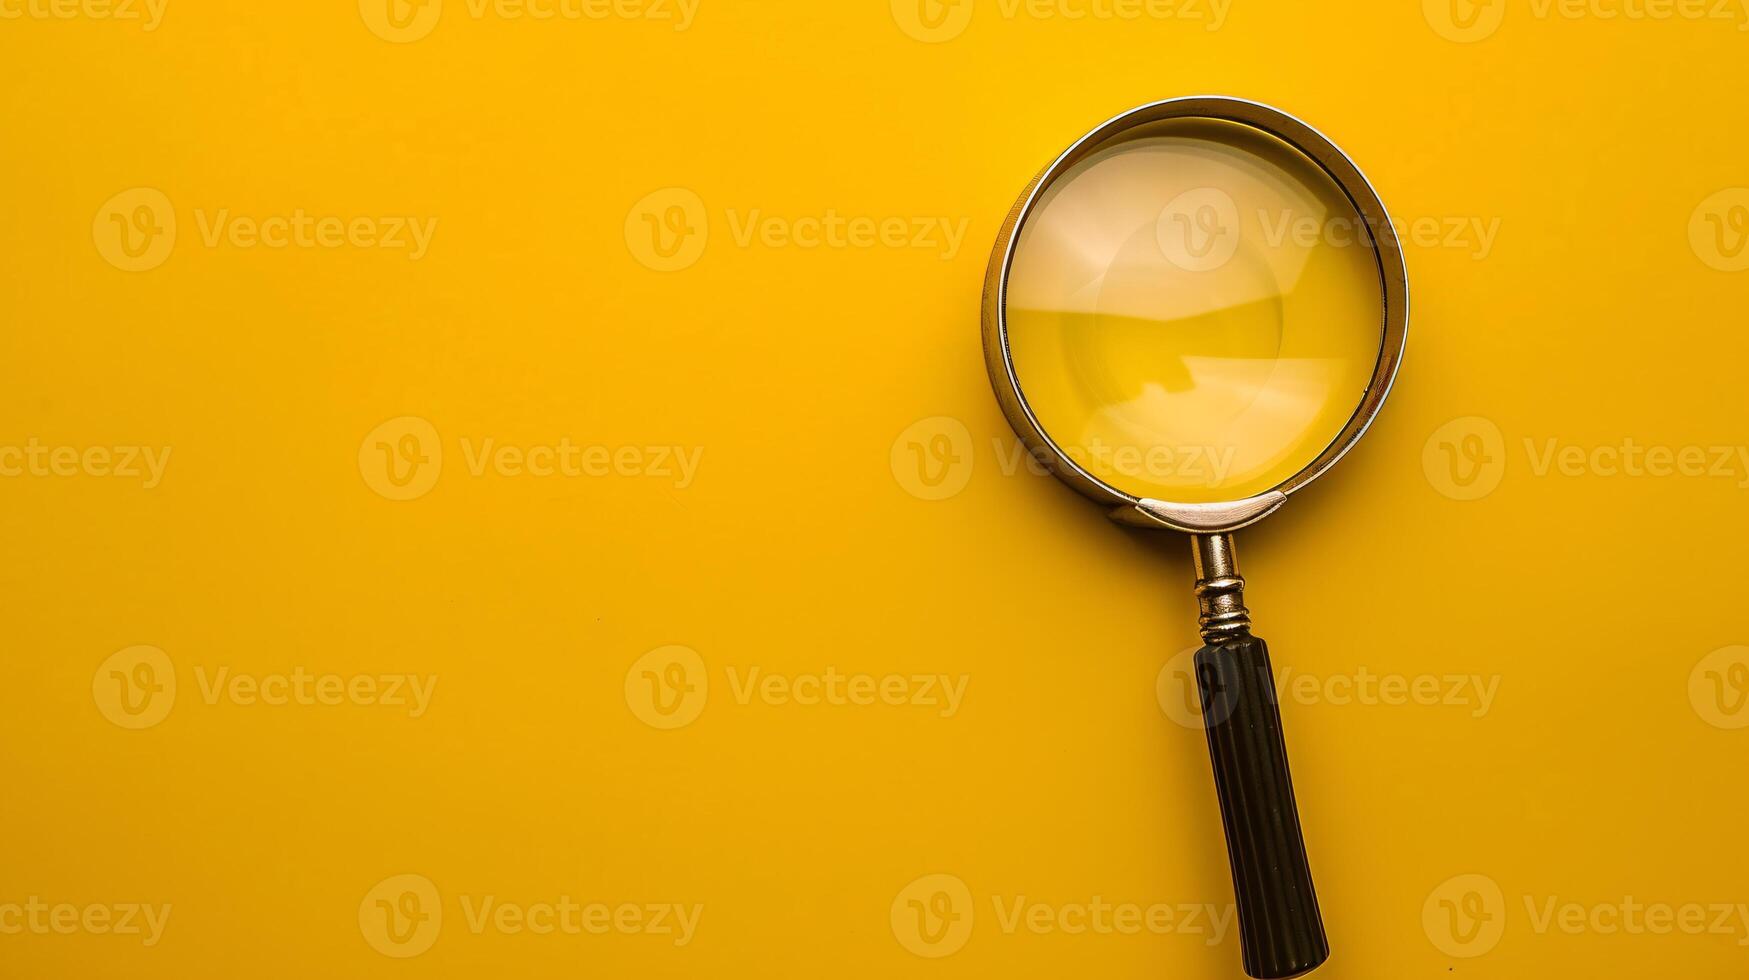 A single antique magnifying glass, placed against a muted colored background, symbolizes curiosity and discovery photo